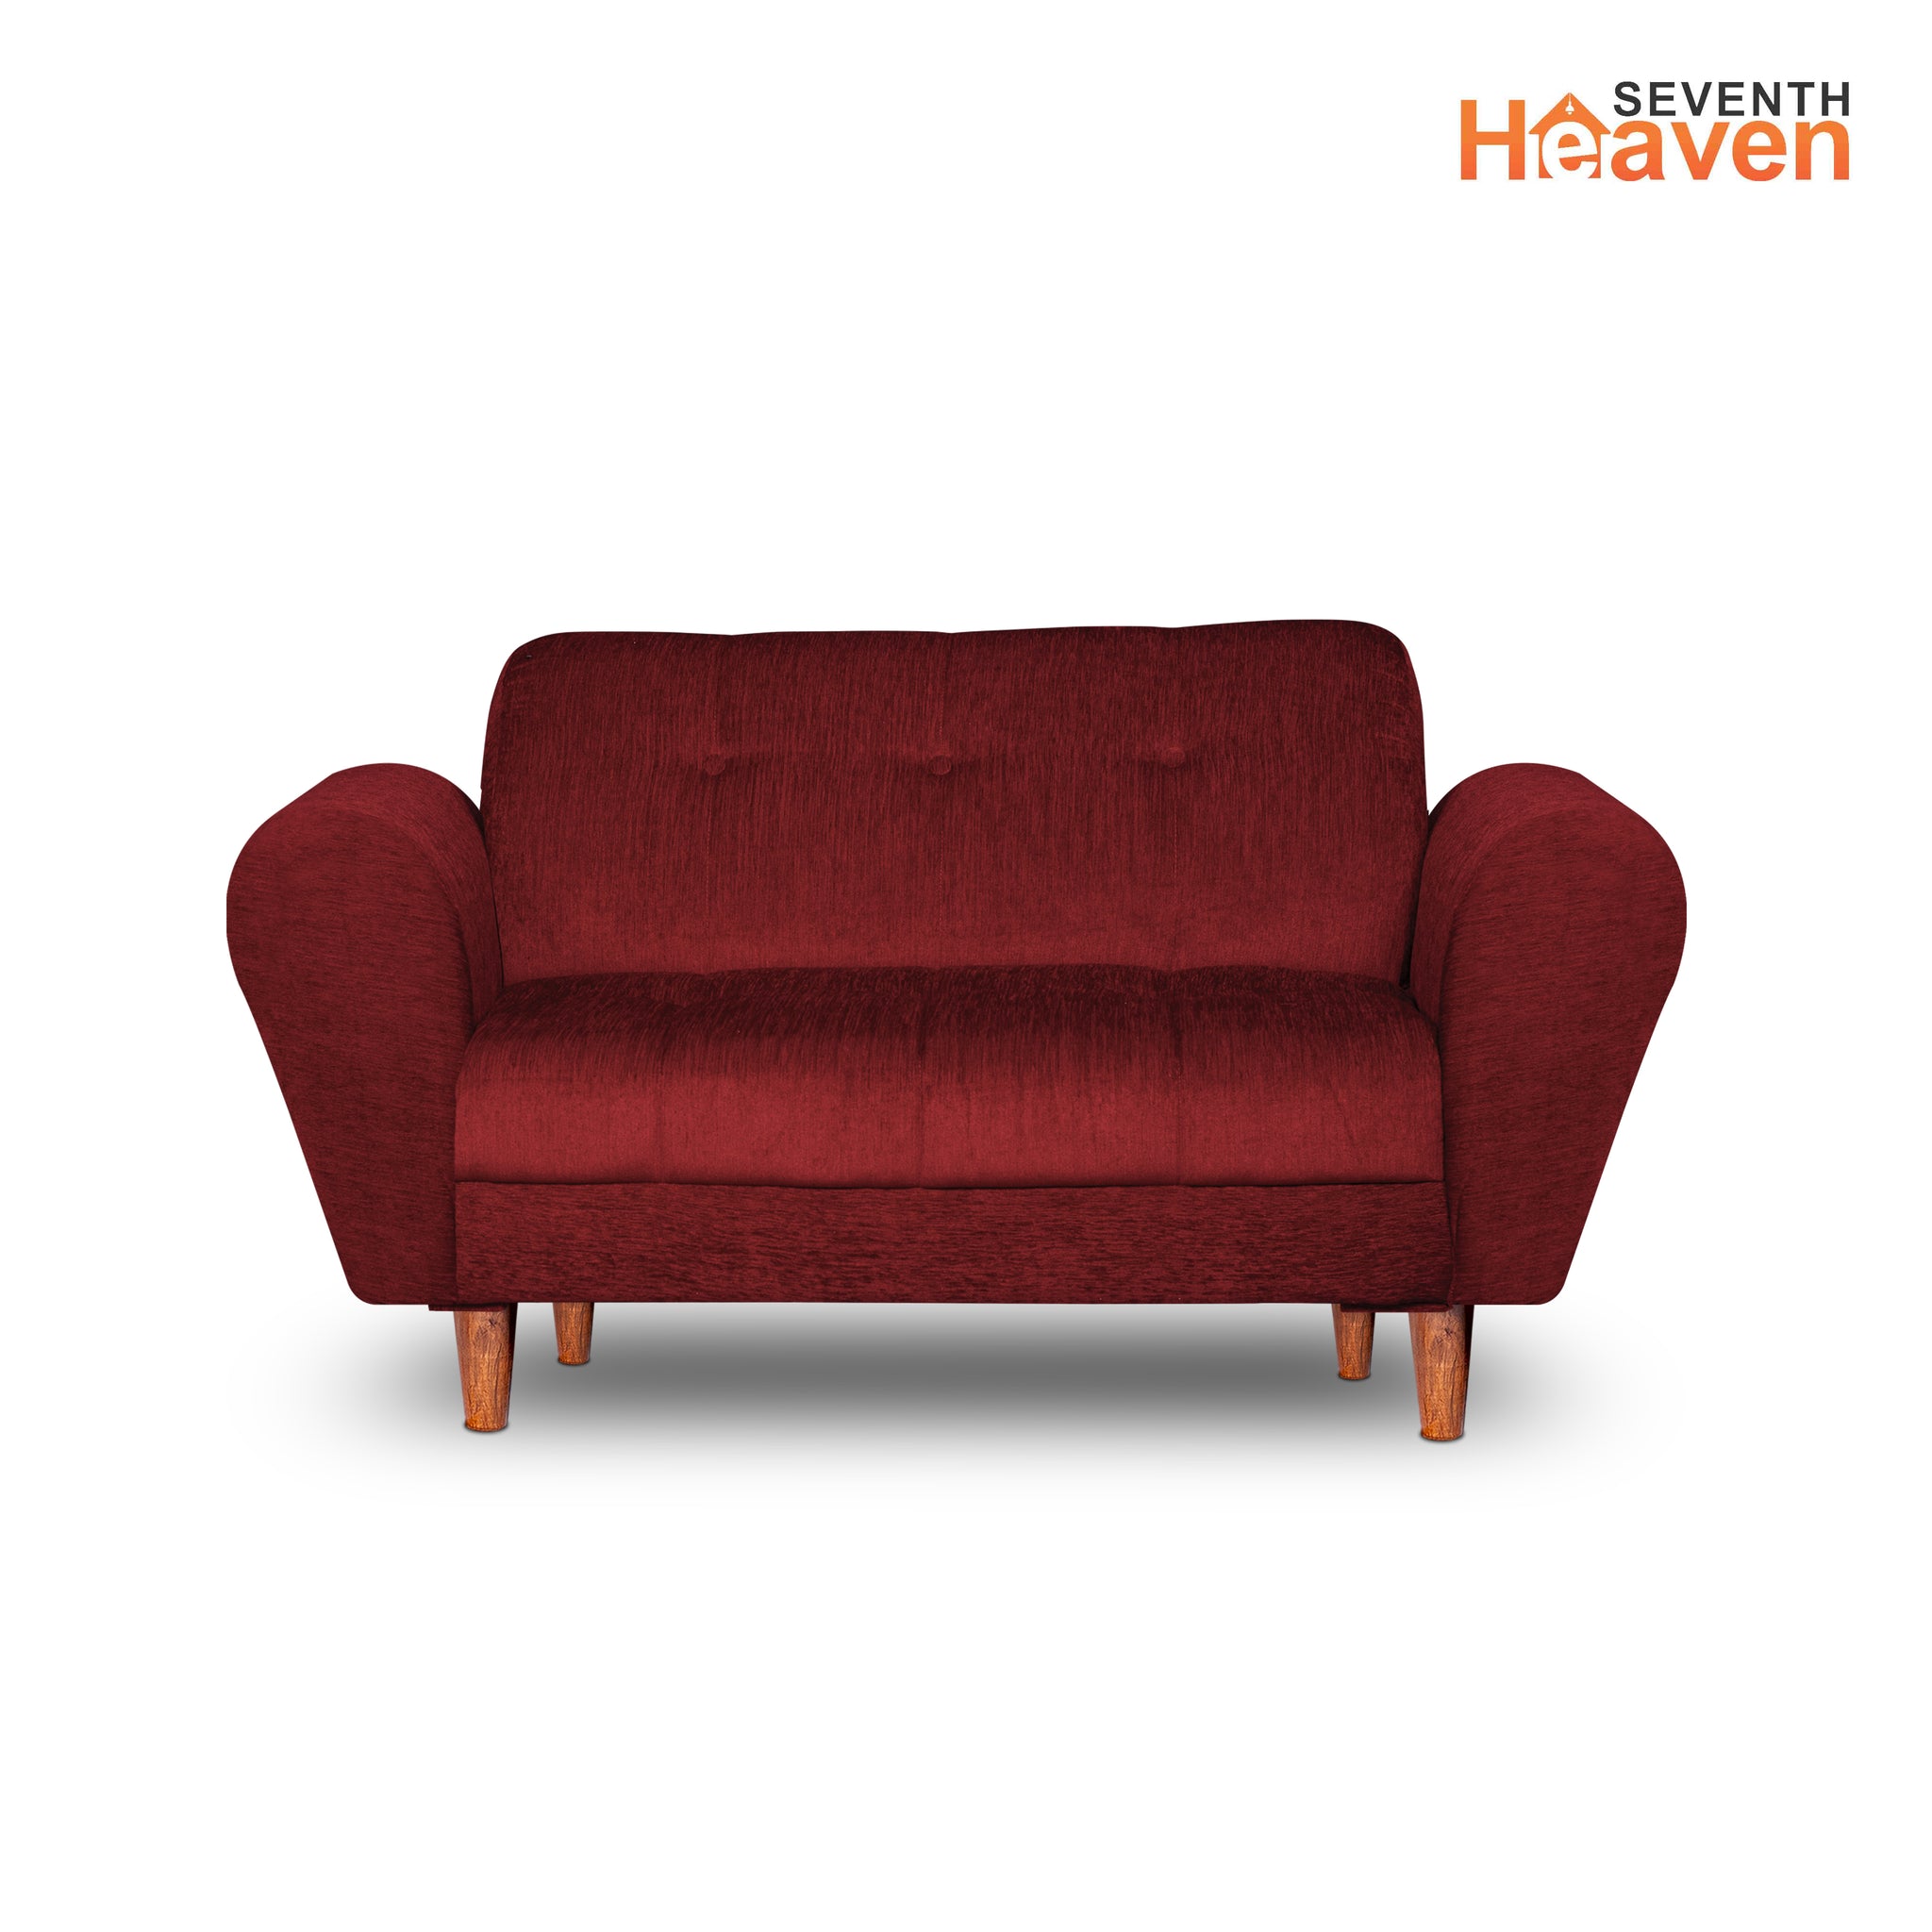 Seventh Heaven Milan 2 Seater Wooden Sofa Set Modern & Elegant Smart Furniture Range for luxurious homes, living rooms and offices. Maroon Colour Molphino fabric with sheesham polished wooden legs.